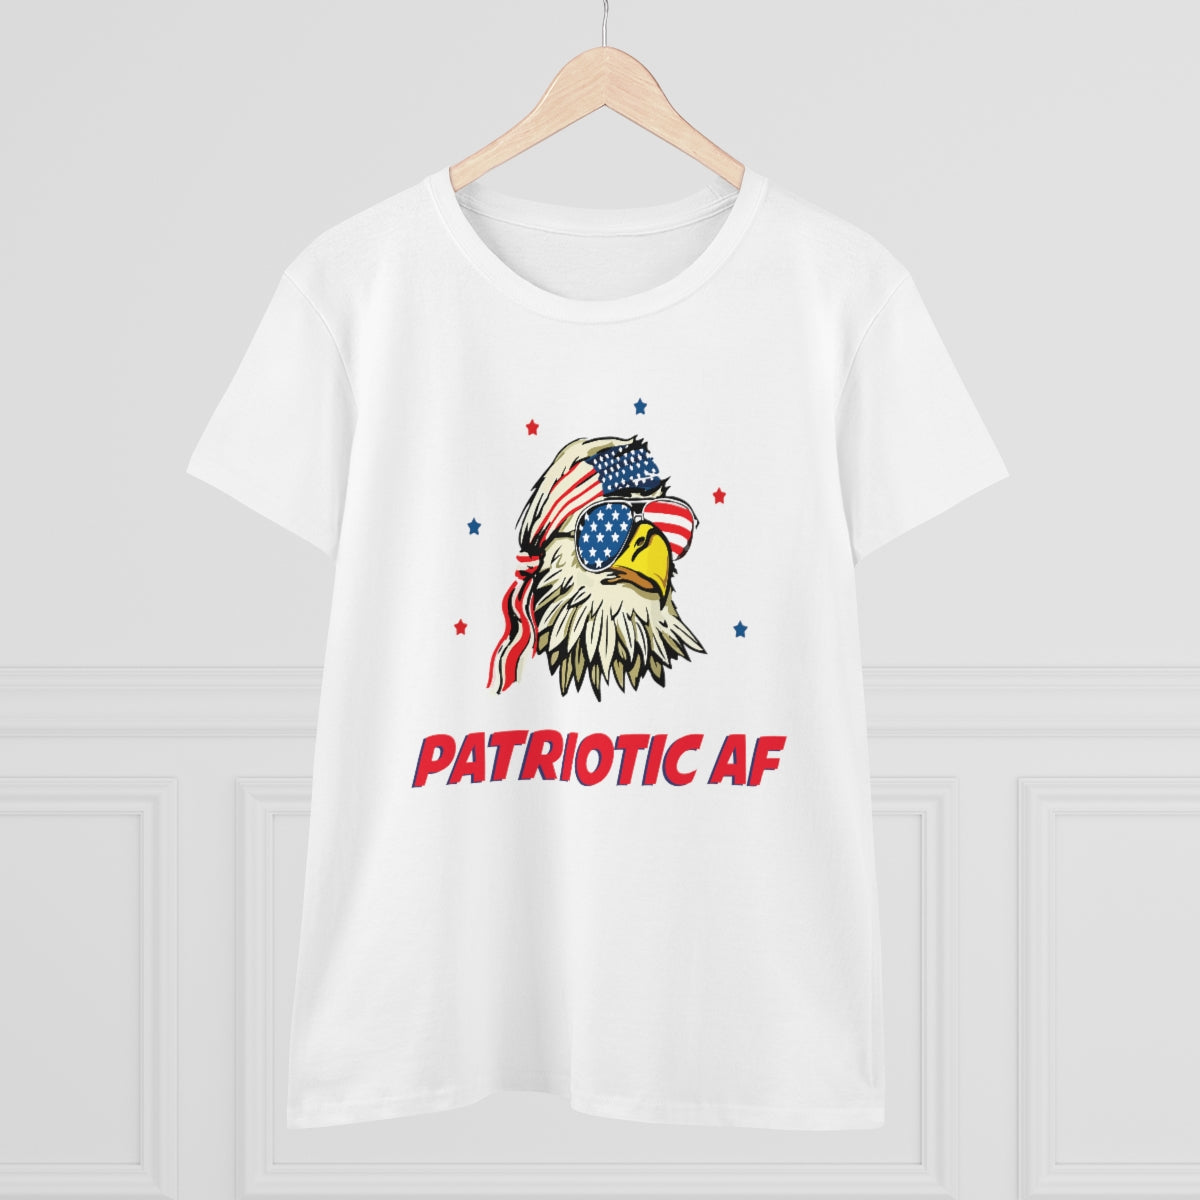 Patriotic AF with American Eagle | Women's Tee - Rise of The New Media